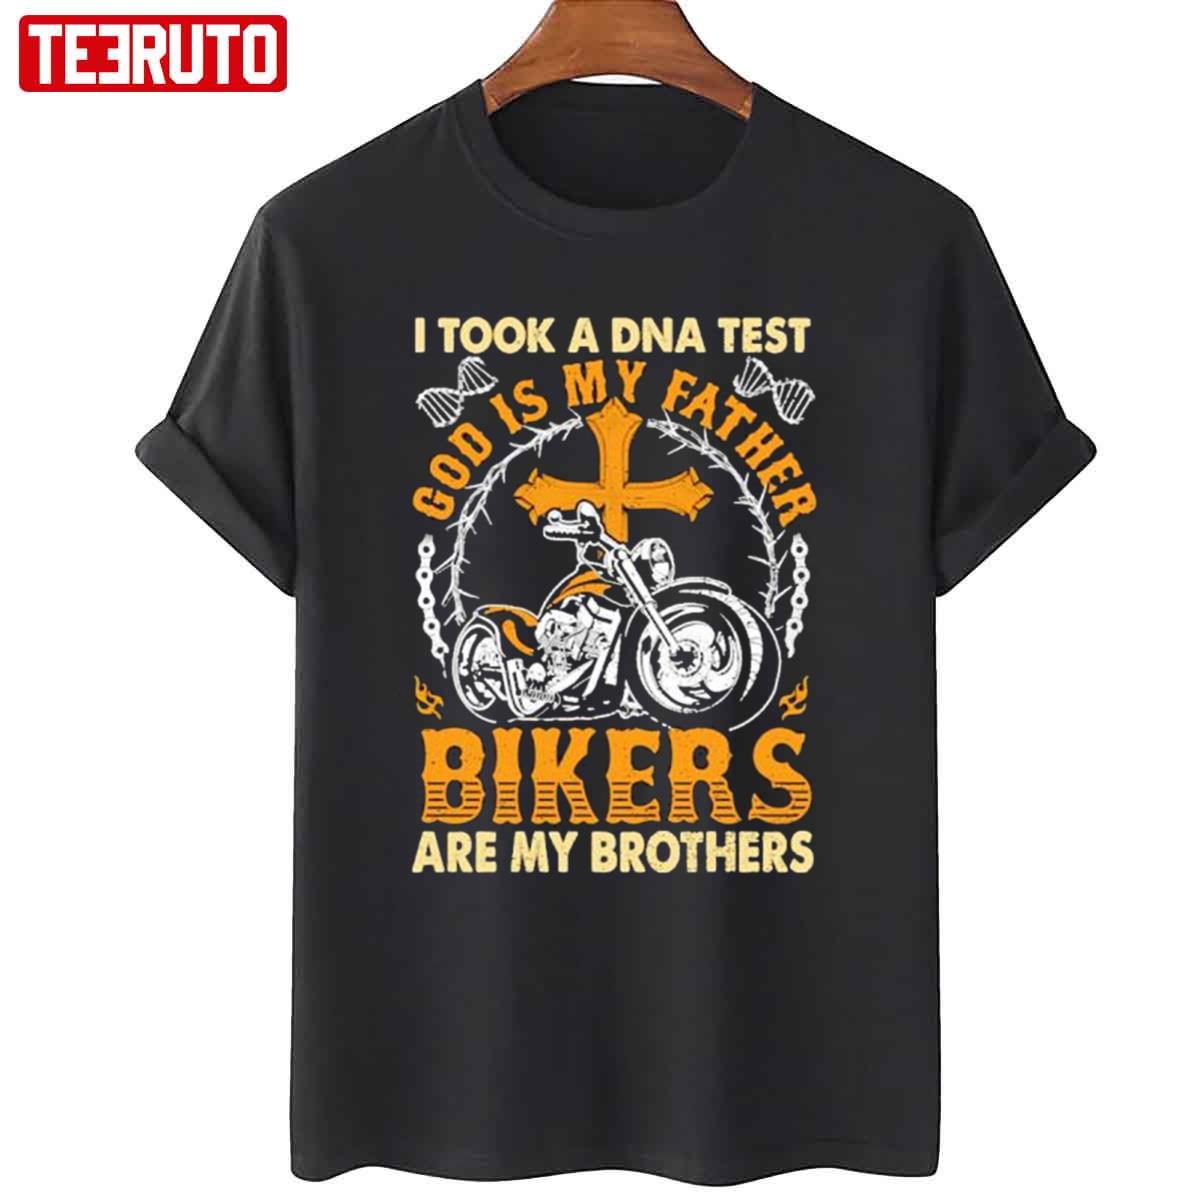 DNA Test God Is My Father Bikers Are My Brothers Unisex T-Shirt